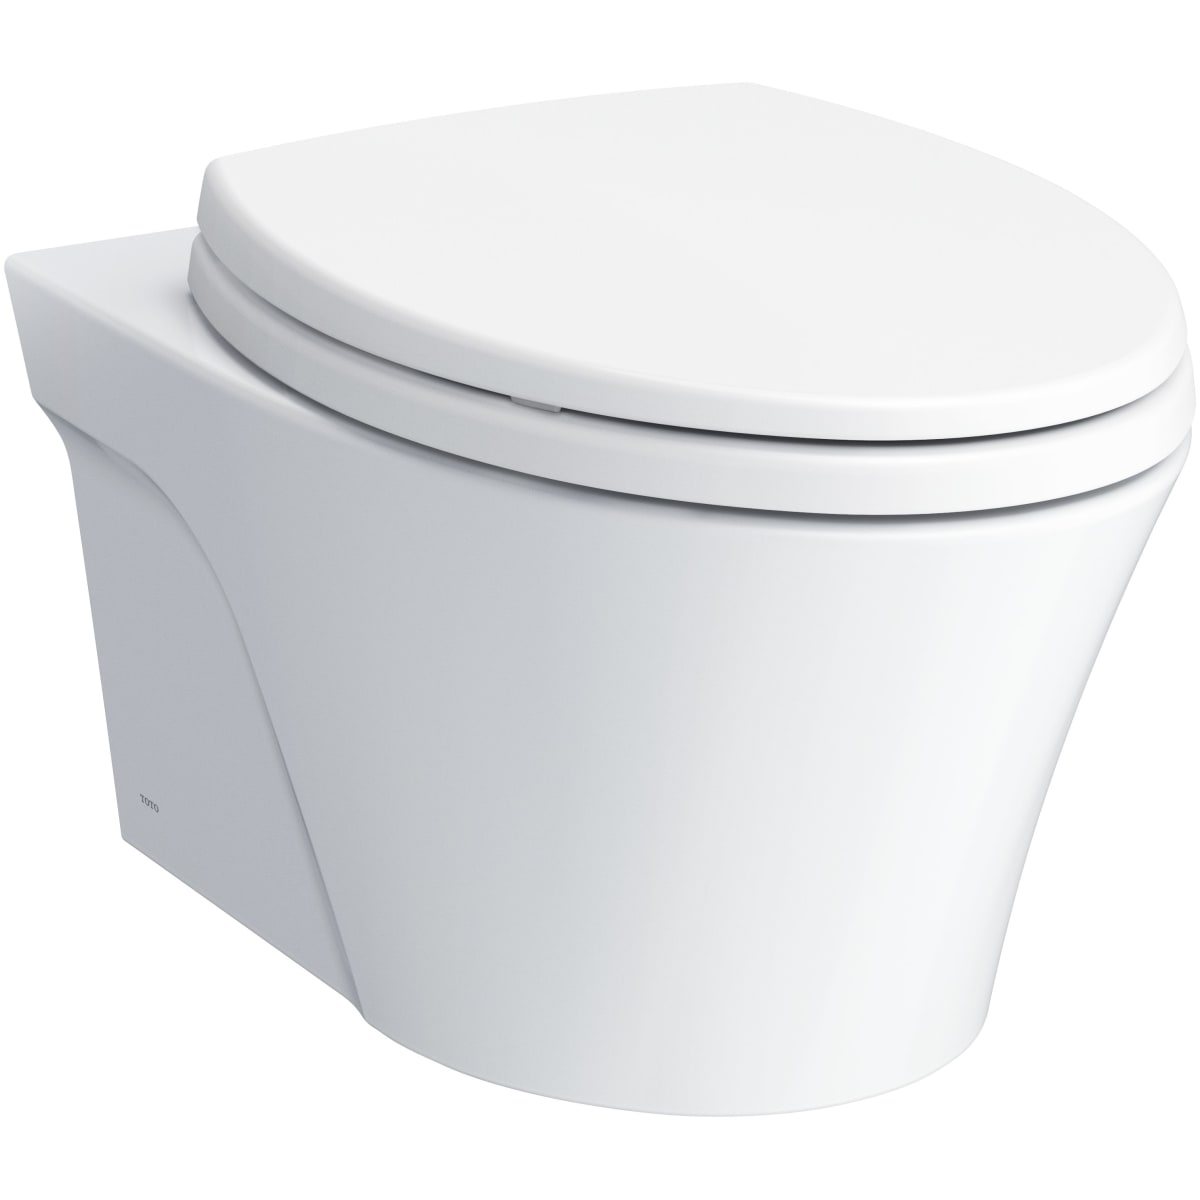 TOTO CT426CFG#01 AP Wall Mounted Elongated Chair Height Toilet Bowl Only with Skirted Design and CeFiONtect - Less Seat in Cotton White